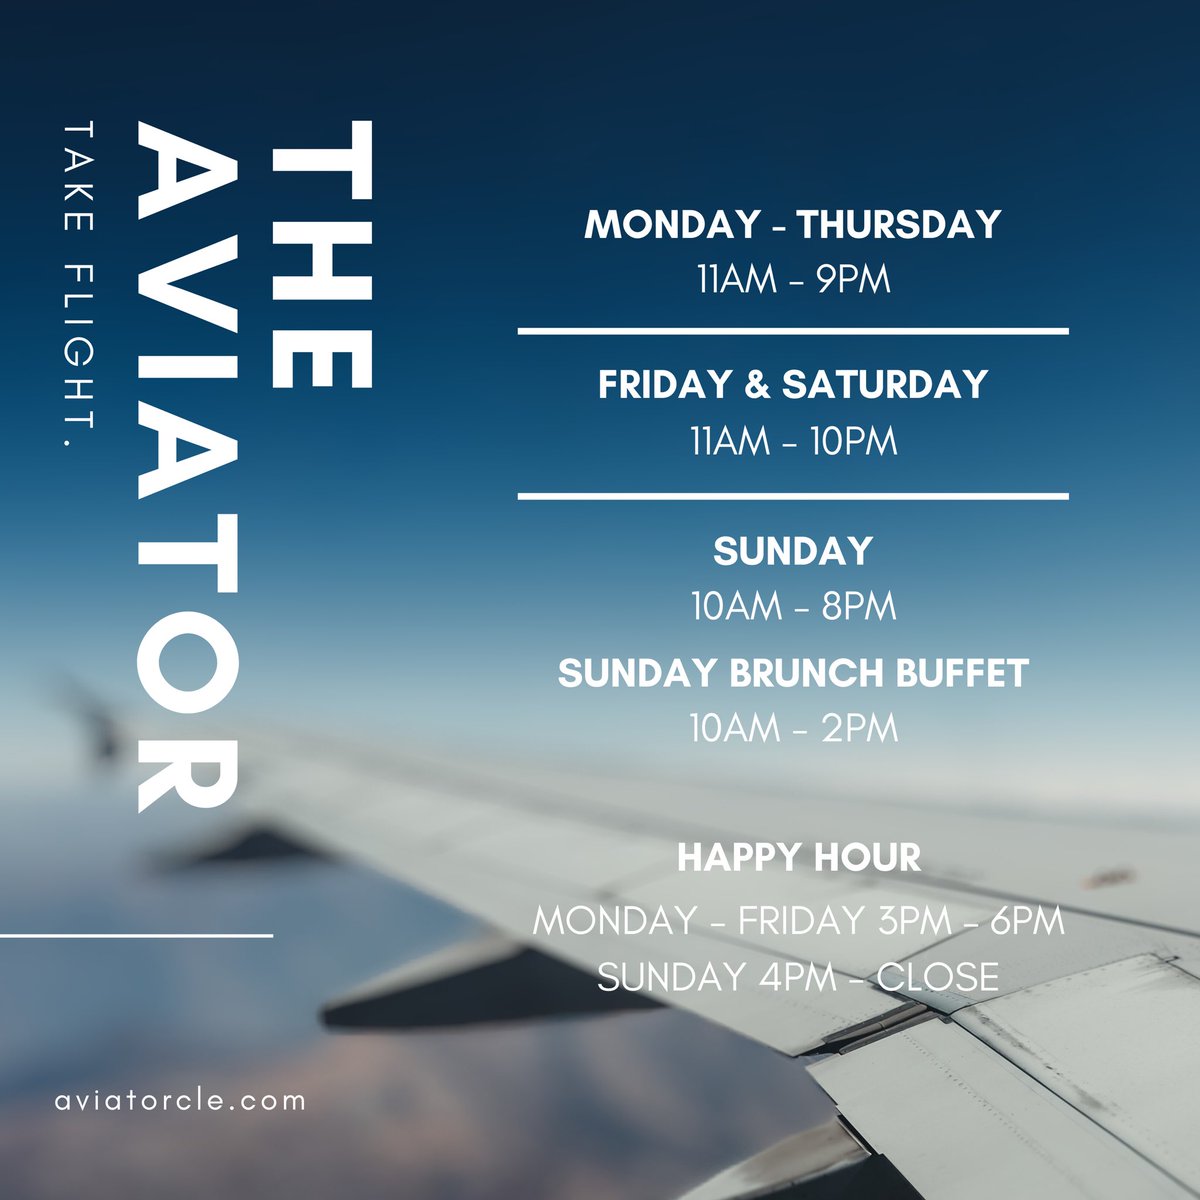 We all know where we want to be this weekend.. ✨✈️ For reservations, please visit: aviatorcle.com